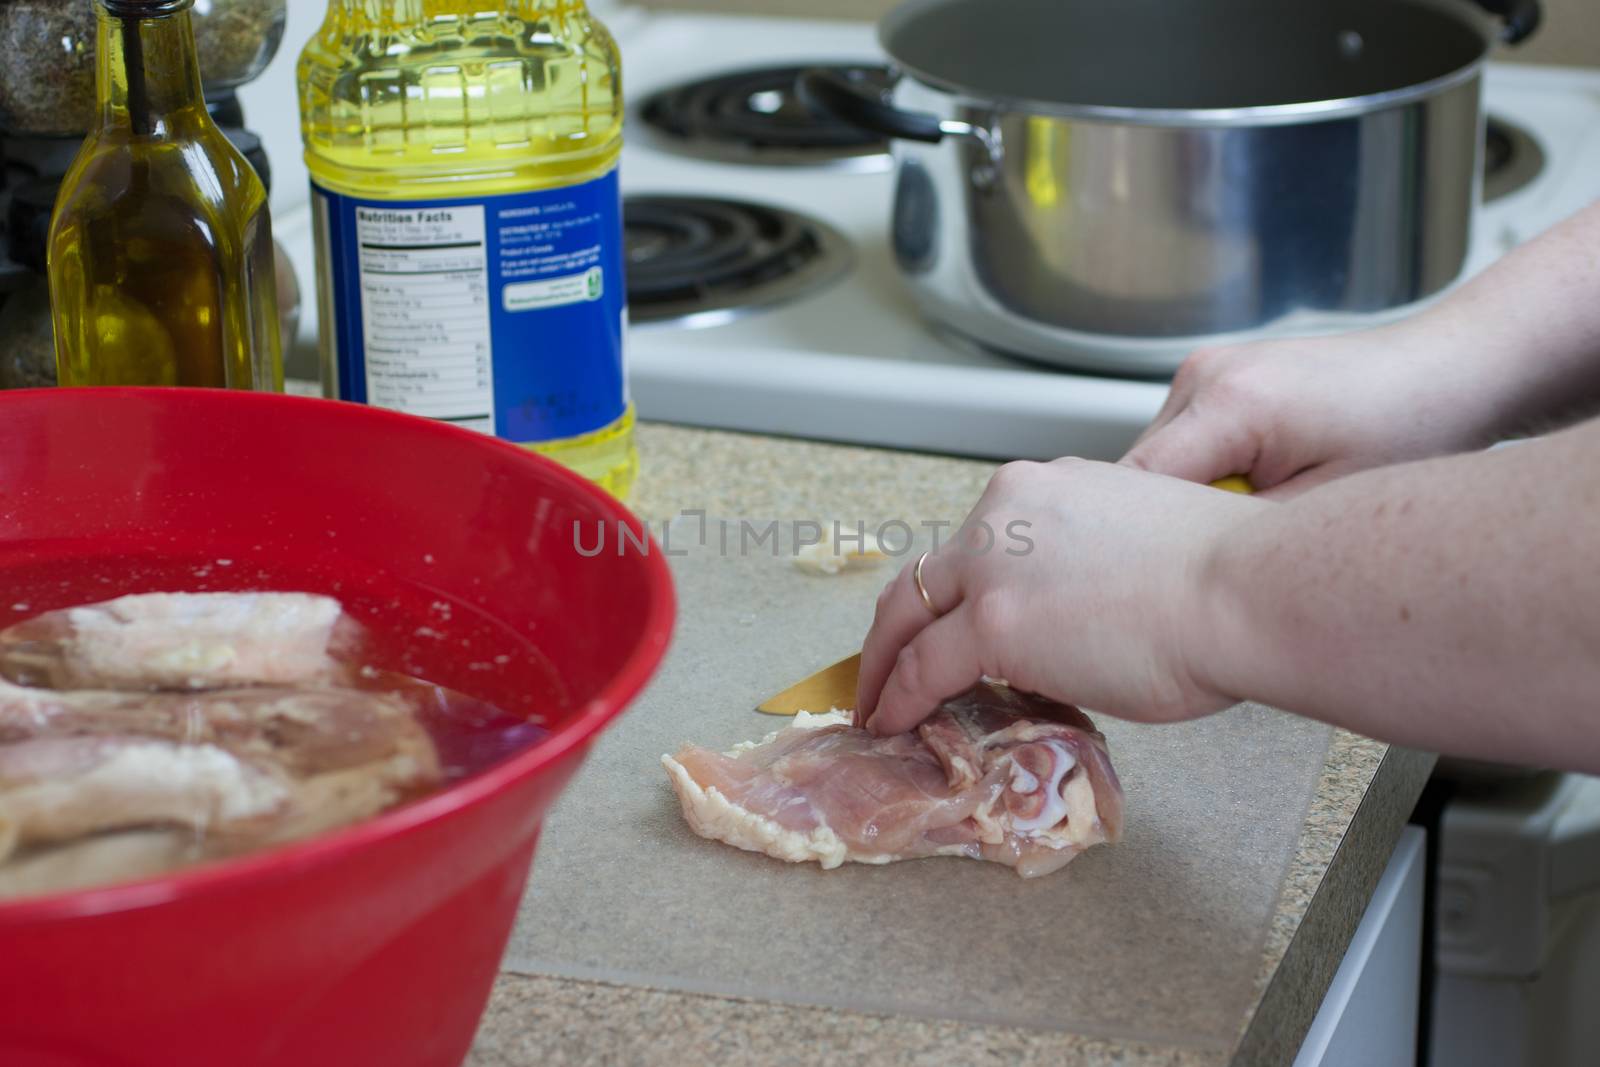 A woman trims and prepares fresh chicken for frying.